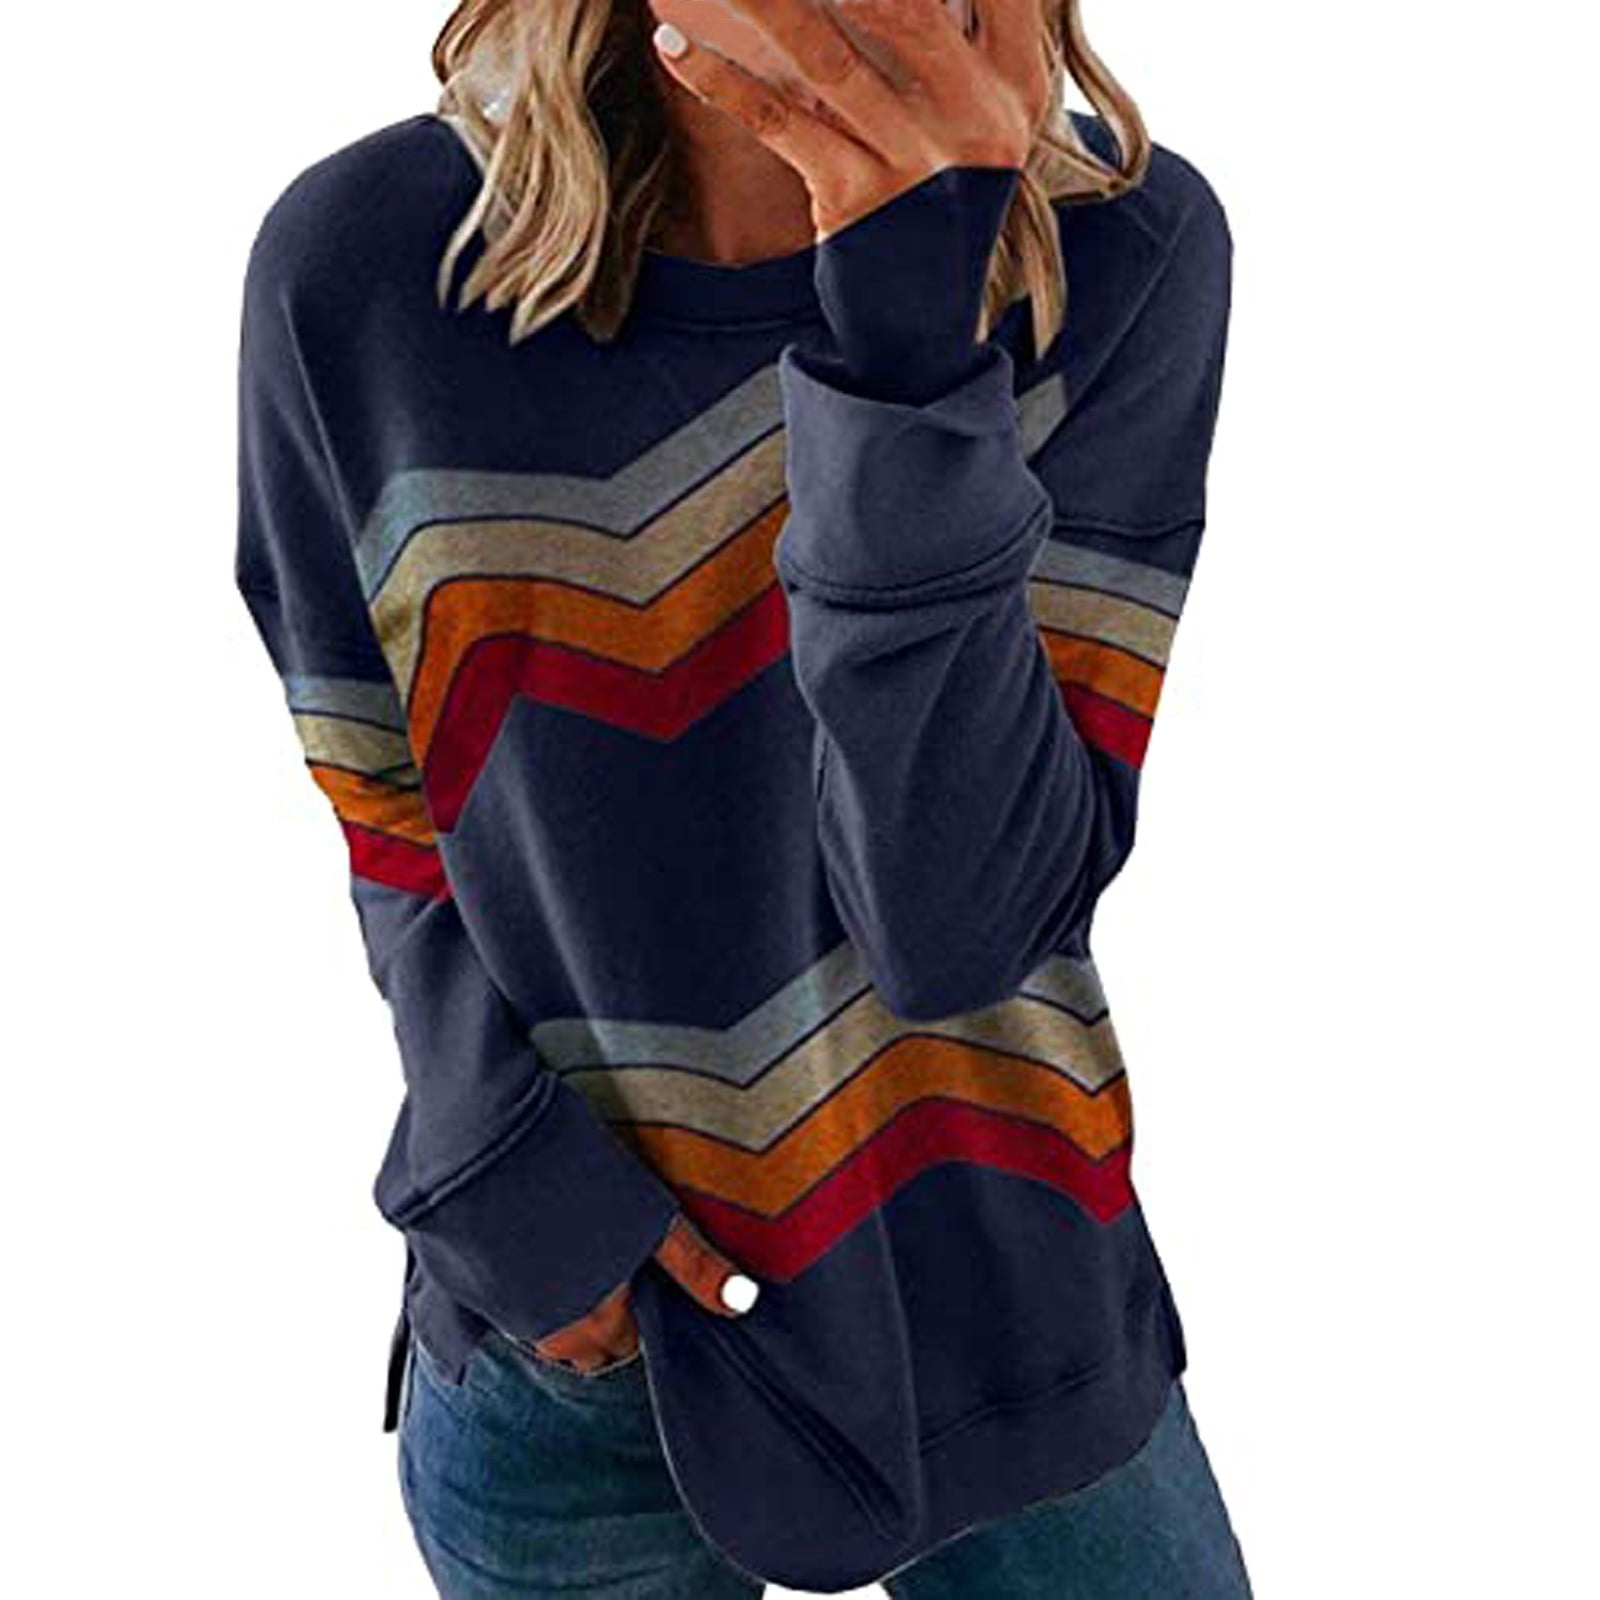 Shirt Matching Stripe Color Slim Sleeve Top Casual T Women's Print Long  Sleeve Undershirts for Women Long Sleeve Turtle Neck Ladies Women Long  Sleeve